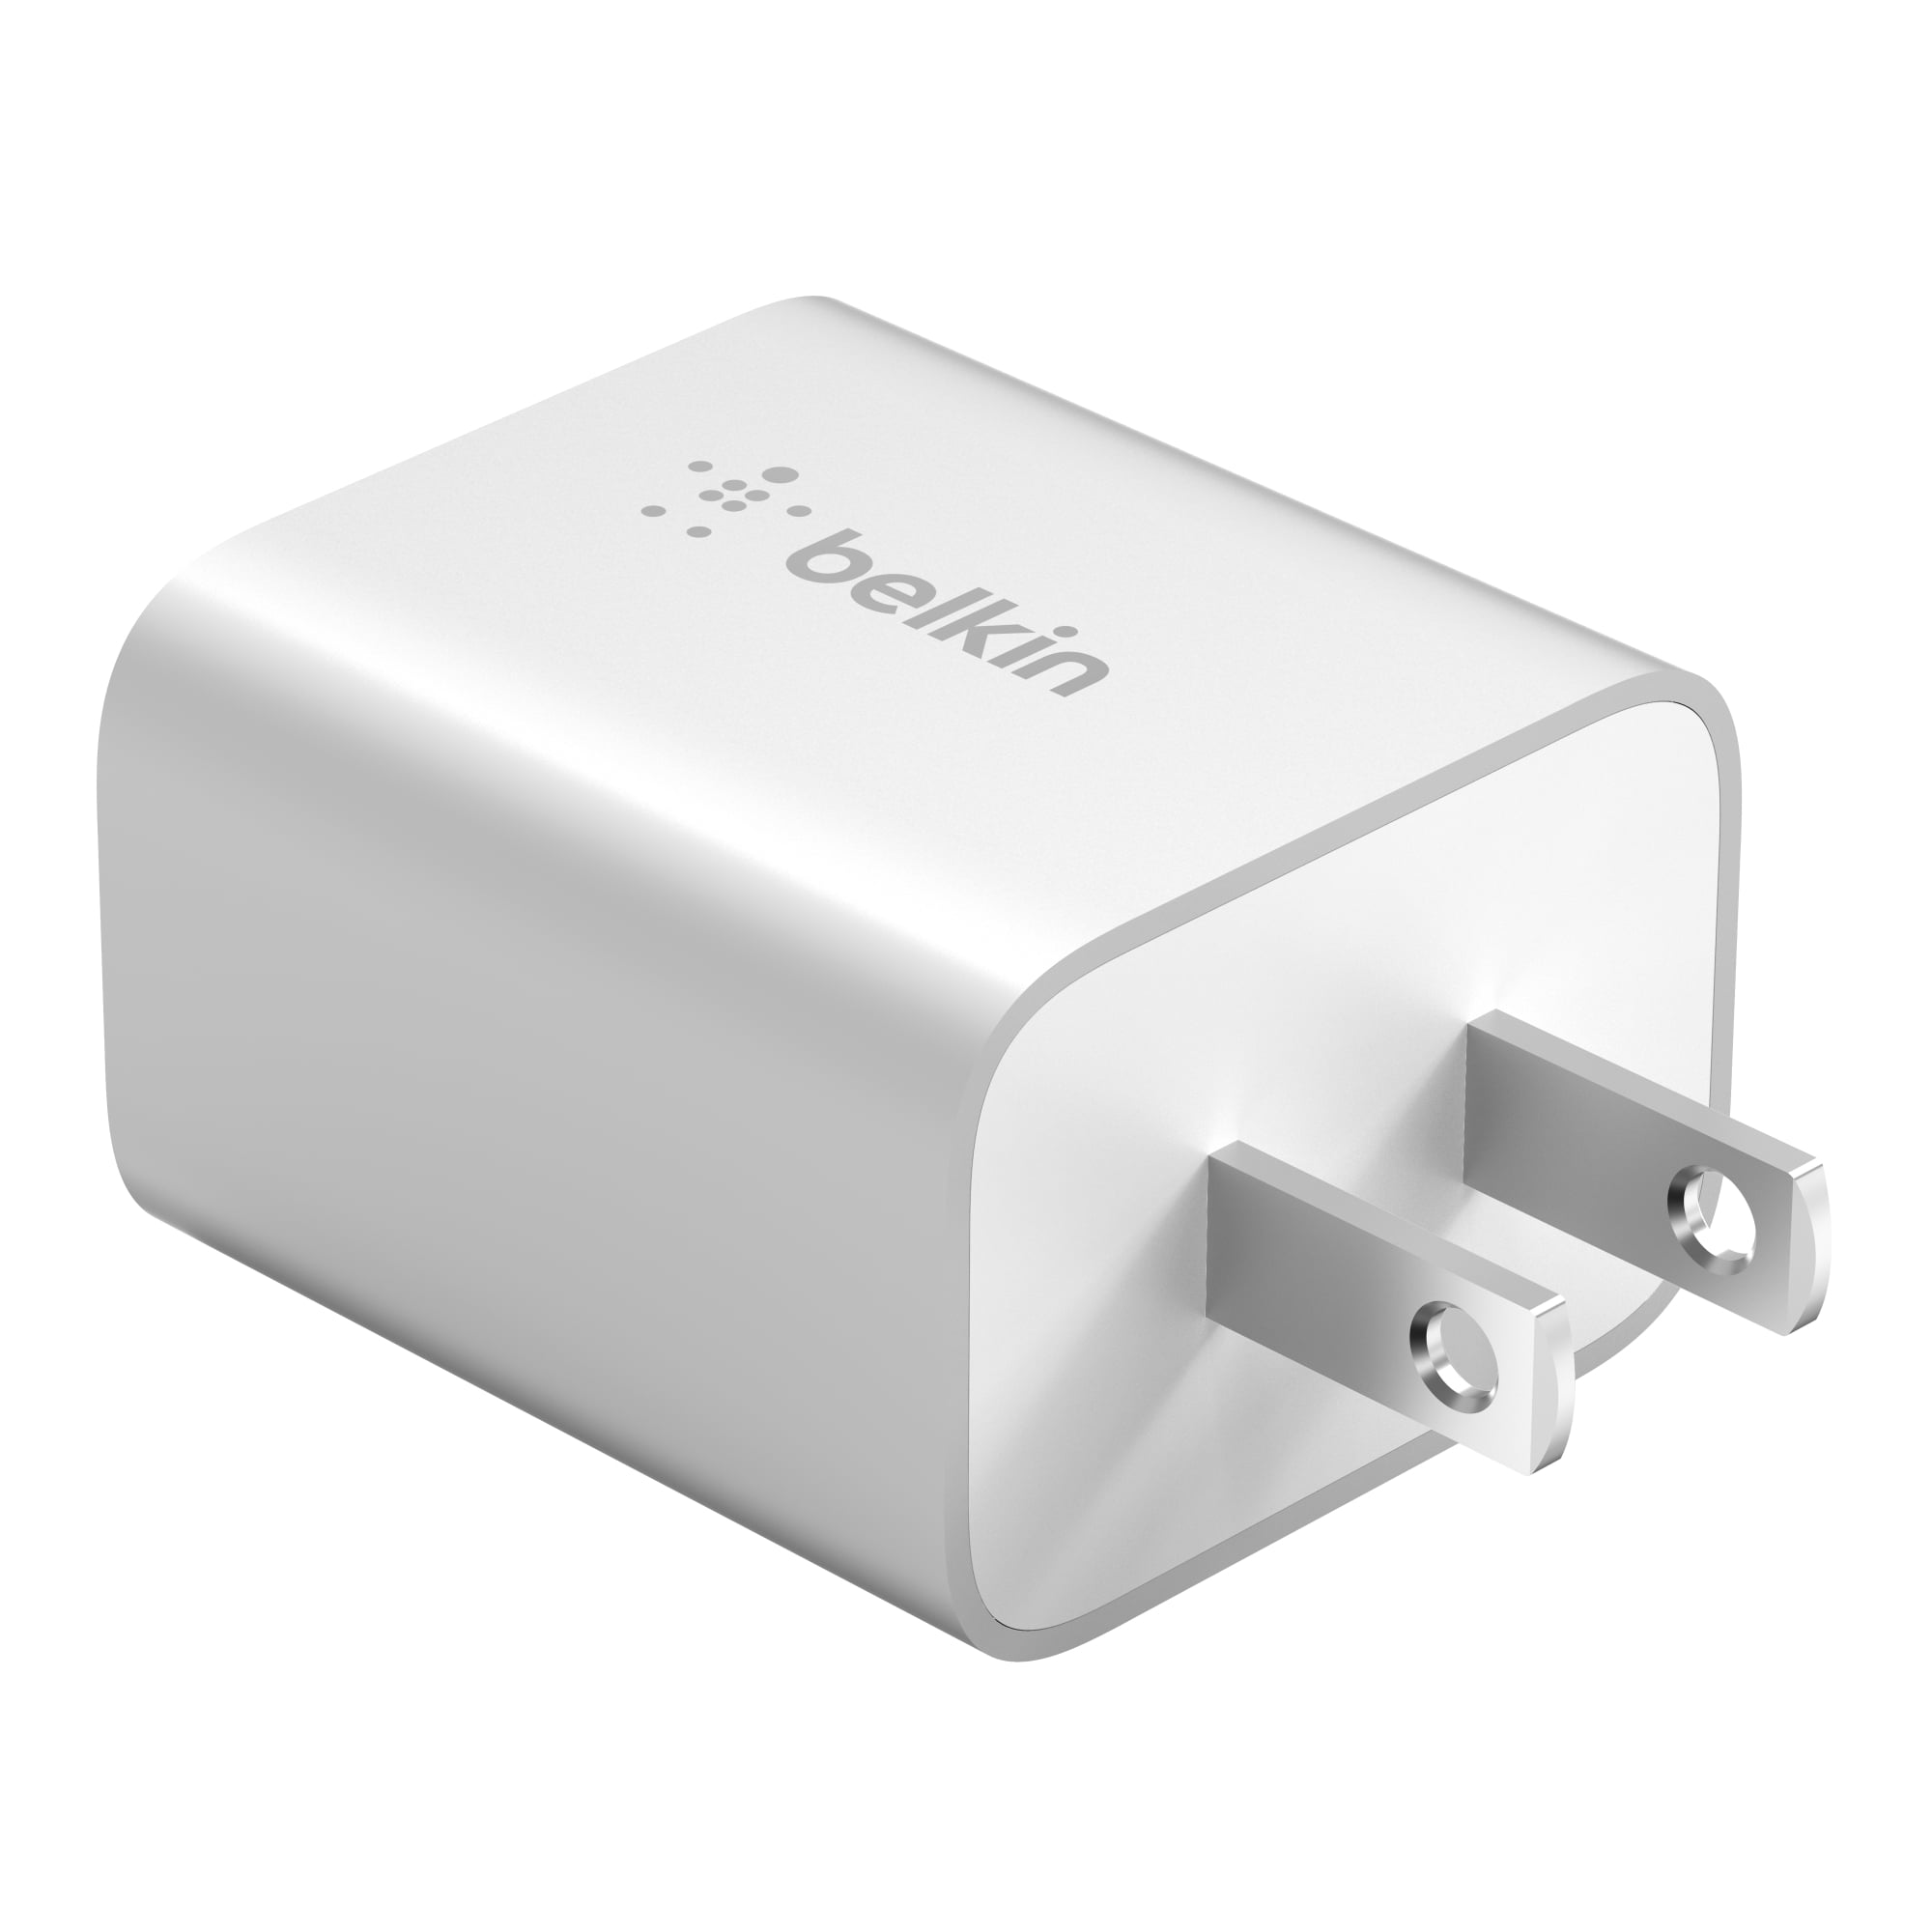 Belkin 20 Watt USB C Wall Charger - USB Type C Charger Fast Charging for Apple iPhone 14, 14 Pro, 14 Pro 13, 13 Pro, 13 Pro Max, Galaxy S21 Ultra,